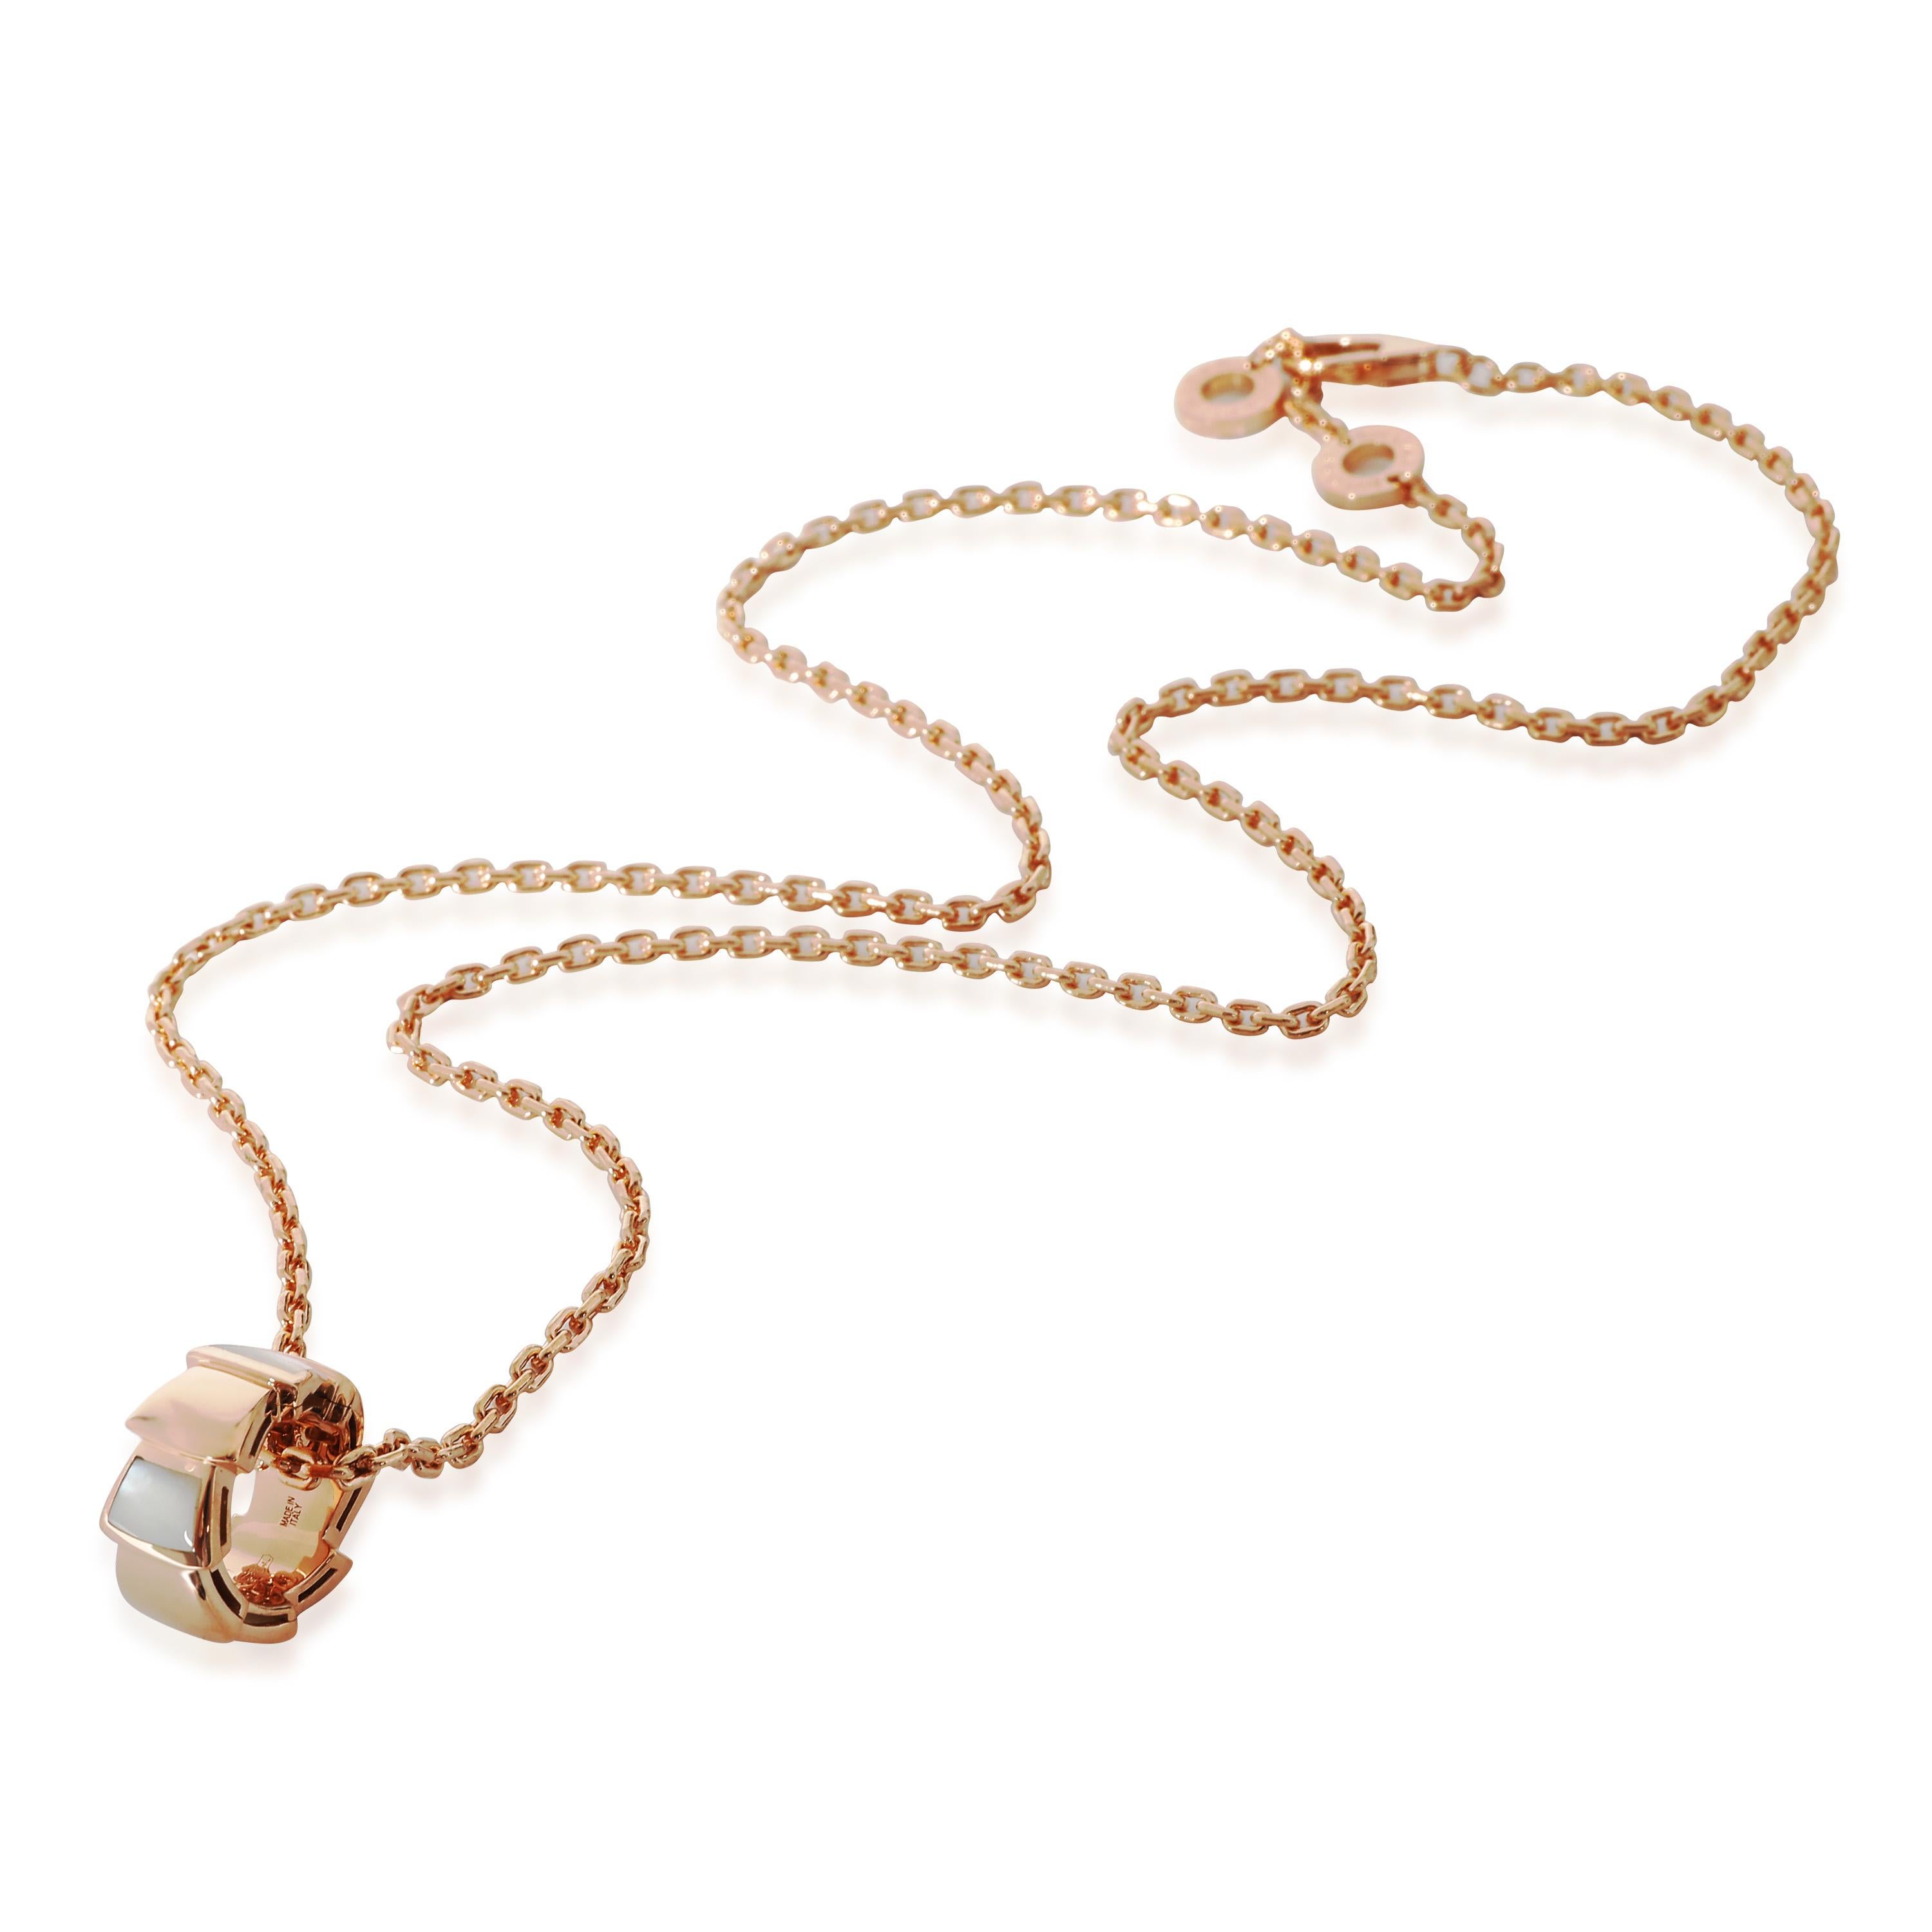 BVLGARI Serpenti Fashion Necklace in 18k Rose Gold

PRIMARY DETAILS
SKU: 133516
Listing Title: BVLGARI Serpenti Fashion Necklace in 18k Rose Gold
Condition Description: BVLGARI Serpenti collection has been a key part of the brand's edit for over 70